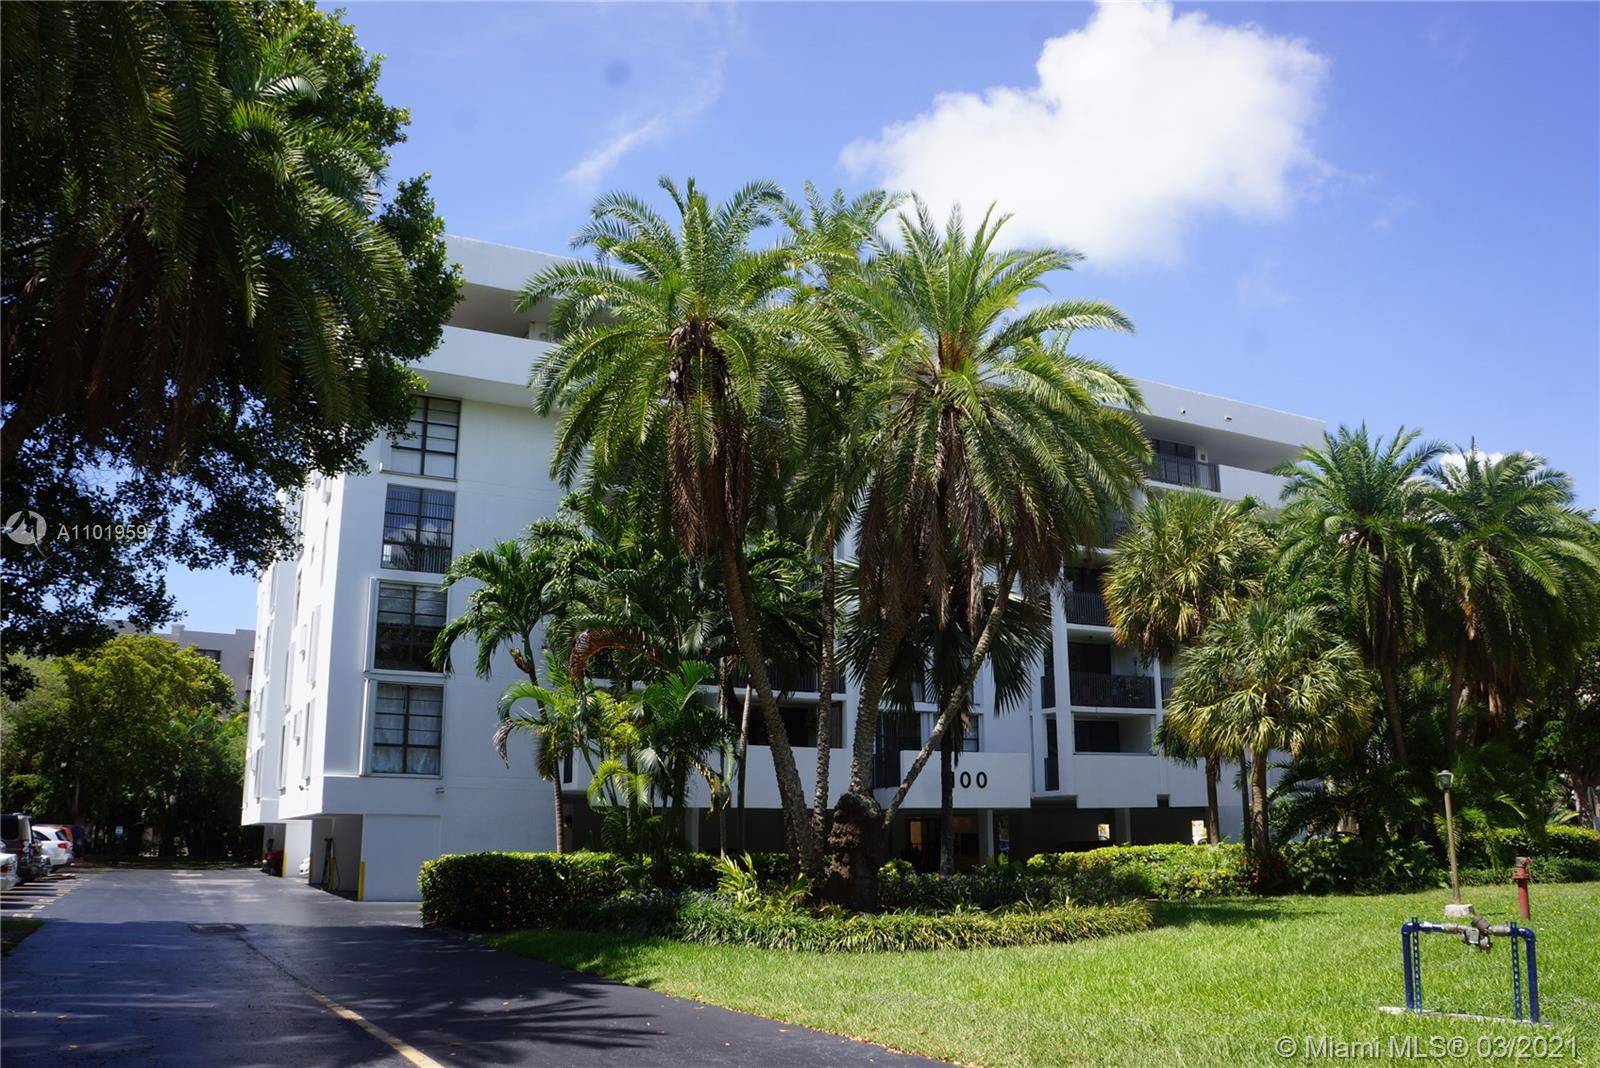 Completely remodeled, bright and spacious 2 2 unit in very private boutique building, just steps away from ocean access.